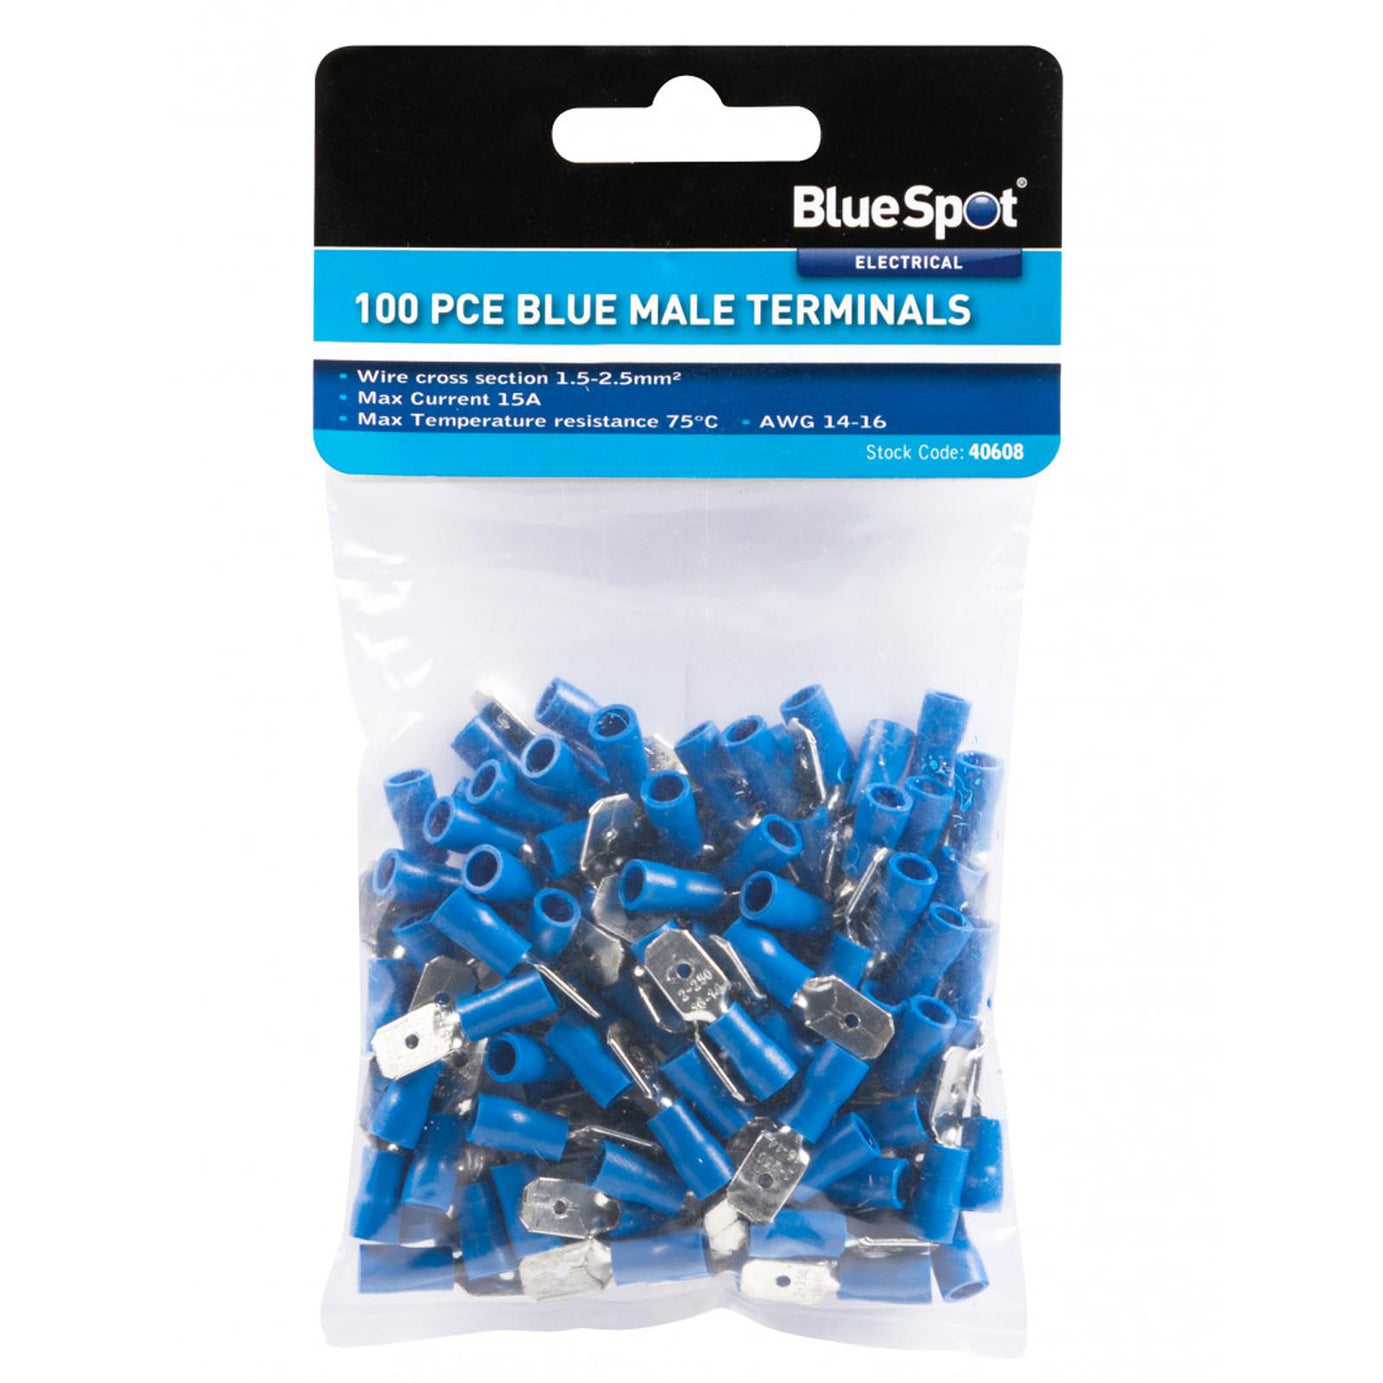 BlueSpot 100Pce Blue Male Terminals Brass And PVC Terminals 15A Electrical New